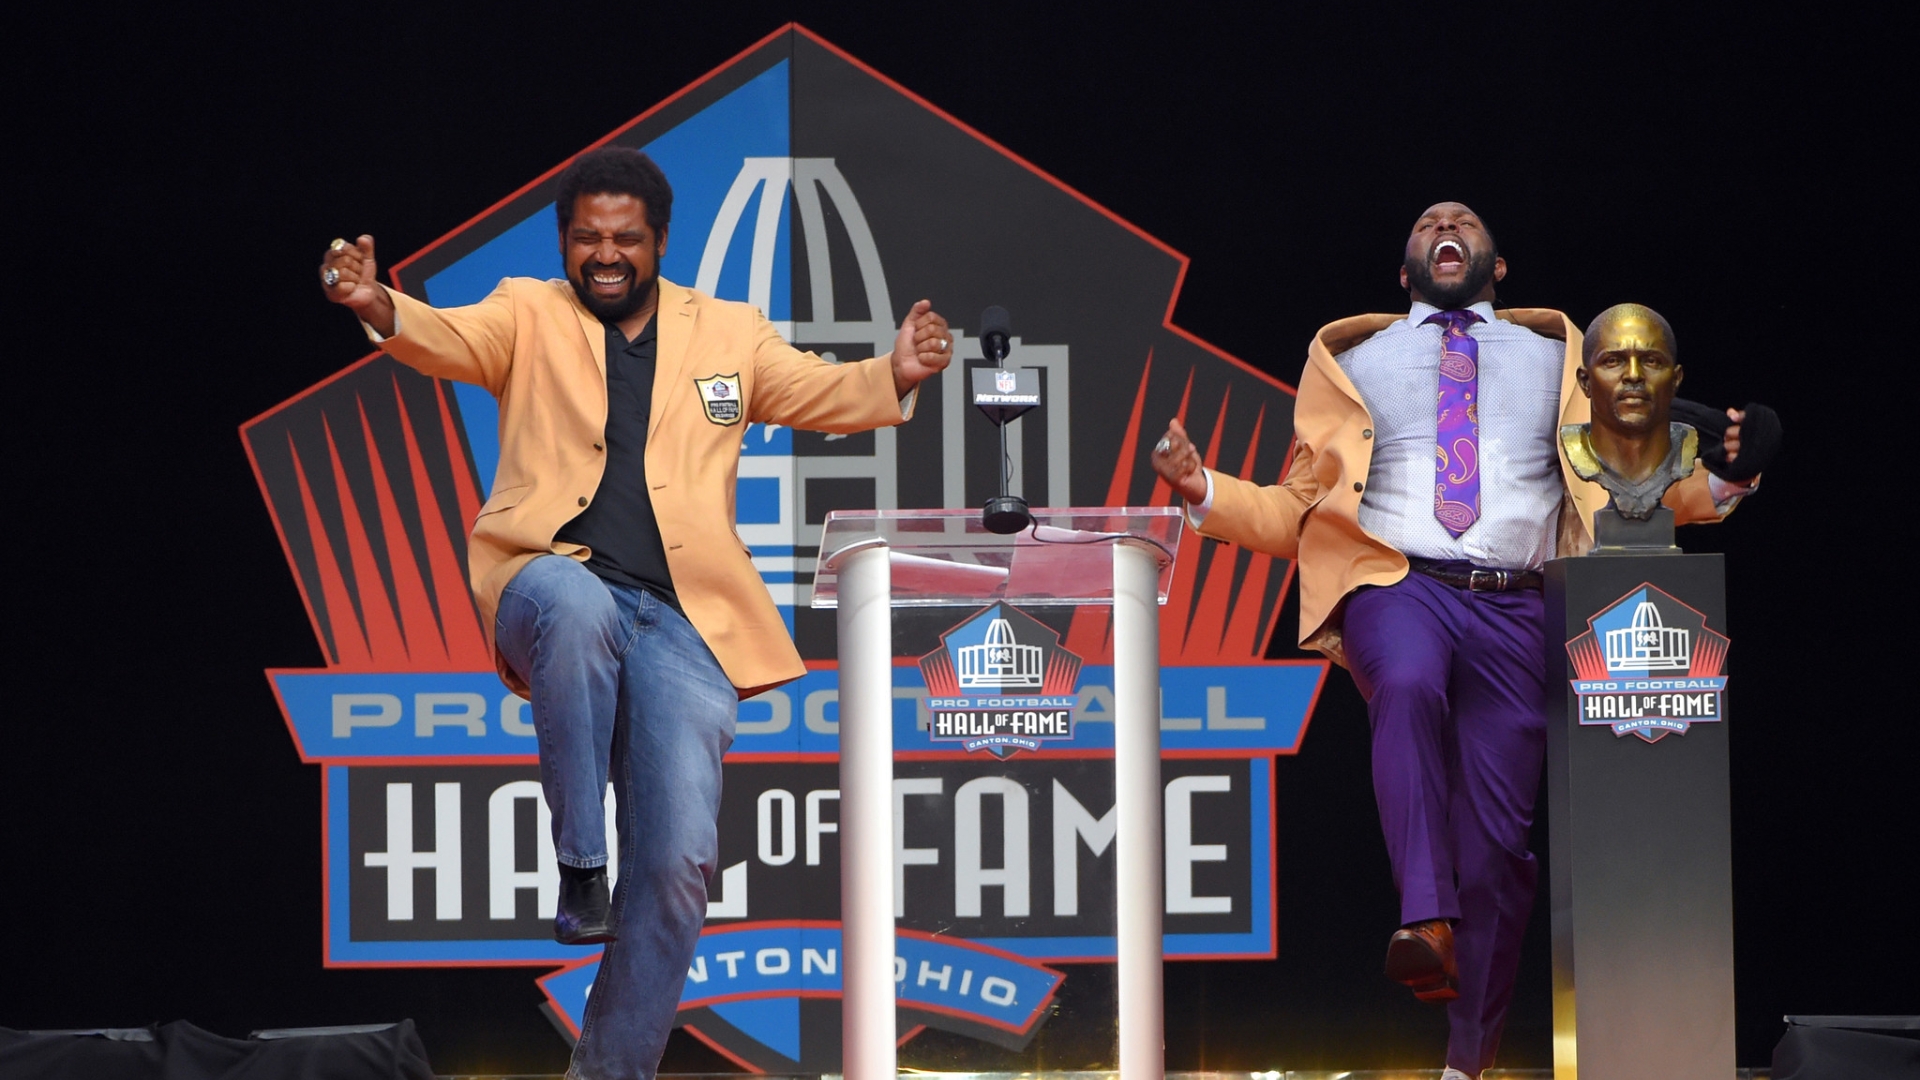 Ray Lewis Named To Pro Football Hall Of Fame